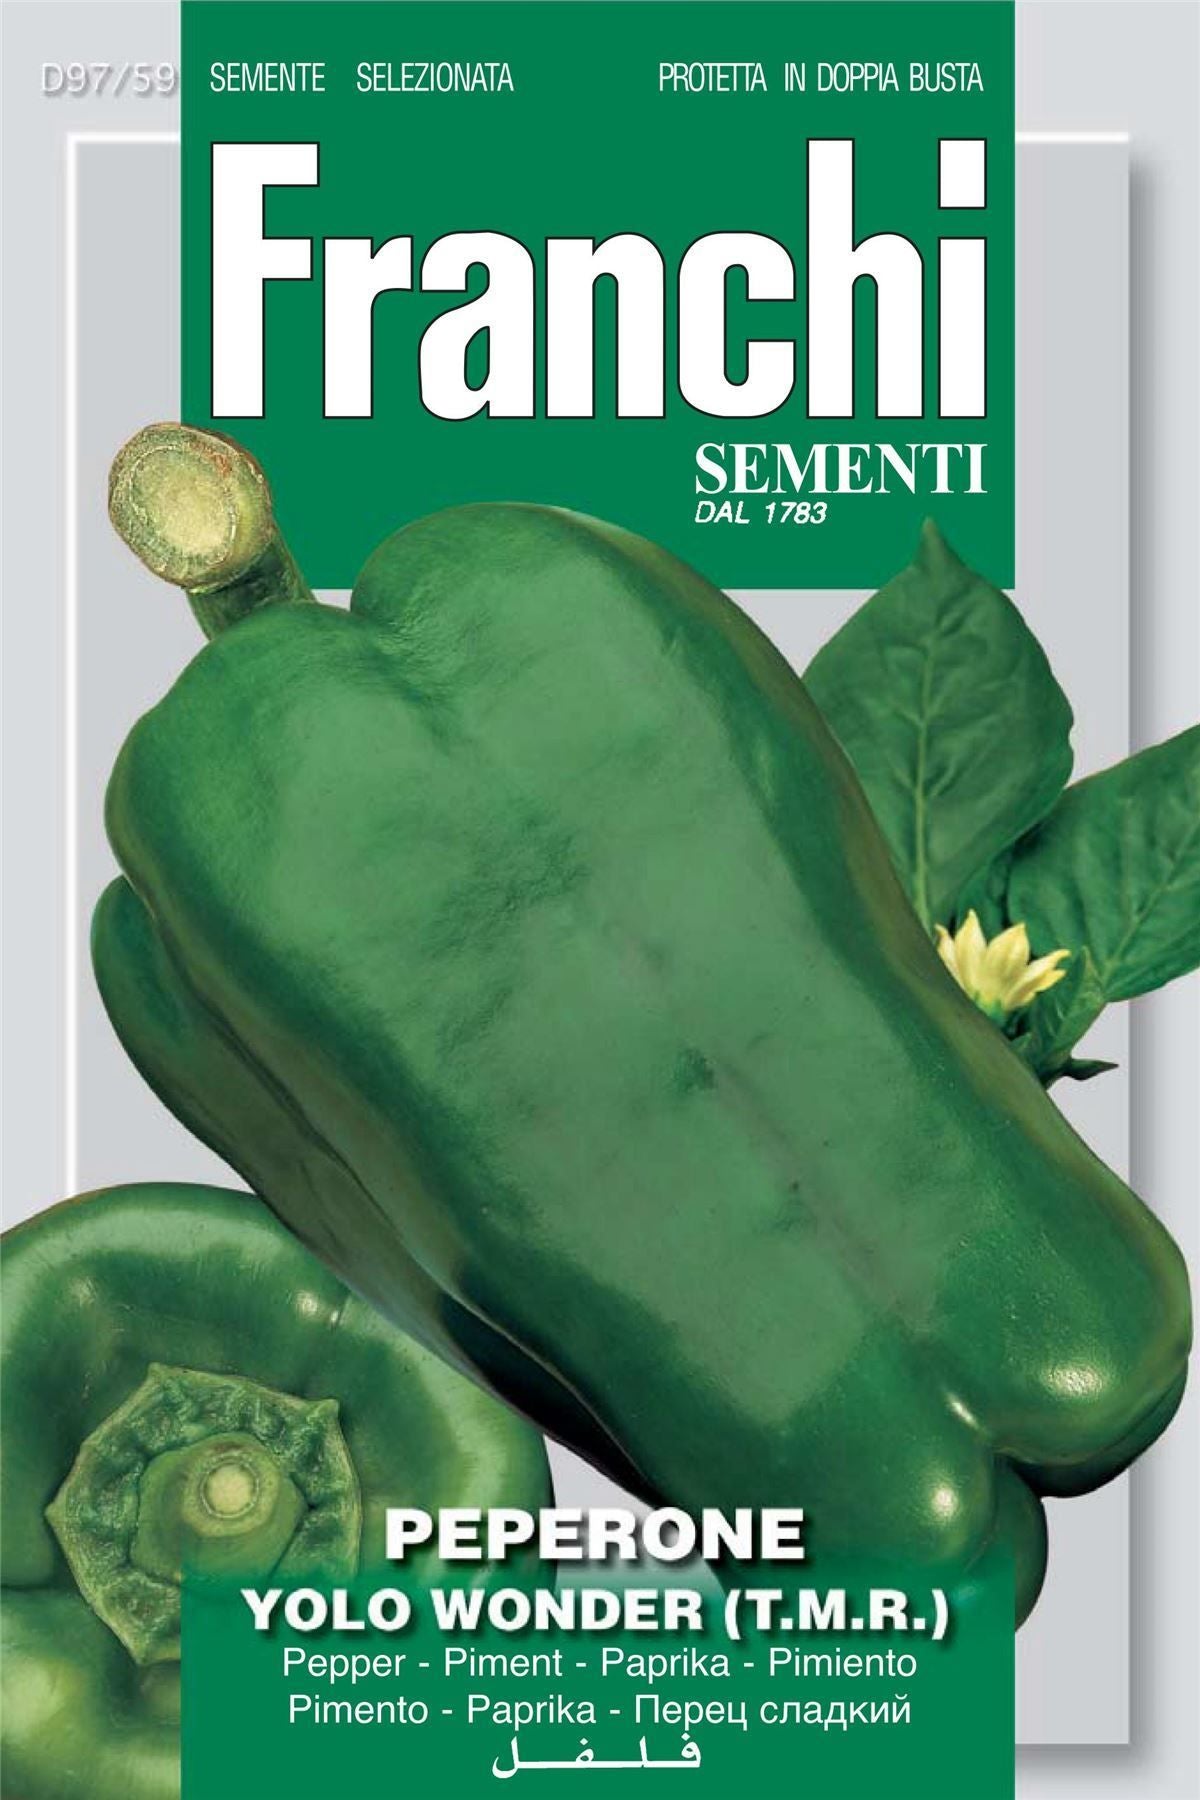 Franchi Seeds of Italy - DBO 97/59 - Pepper - Yolo Wonder - Seeds